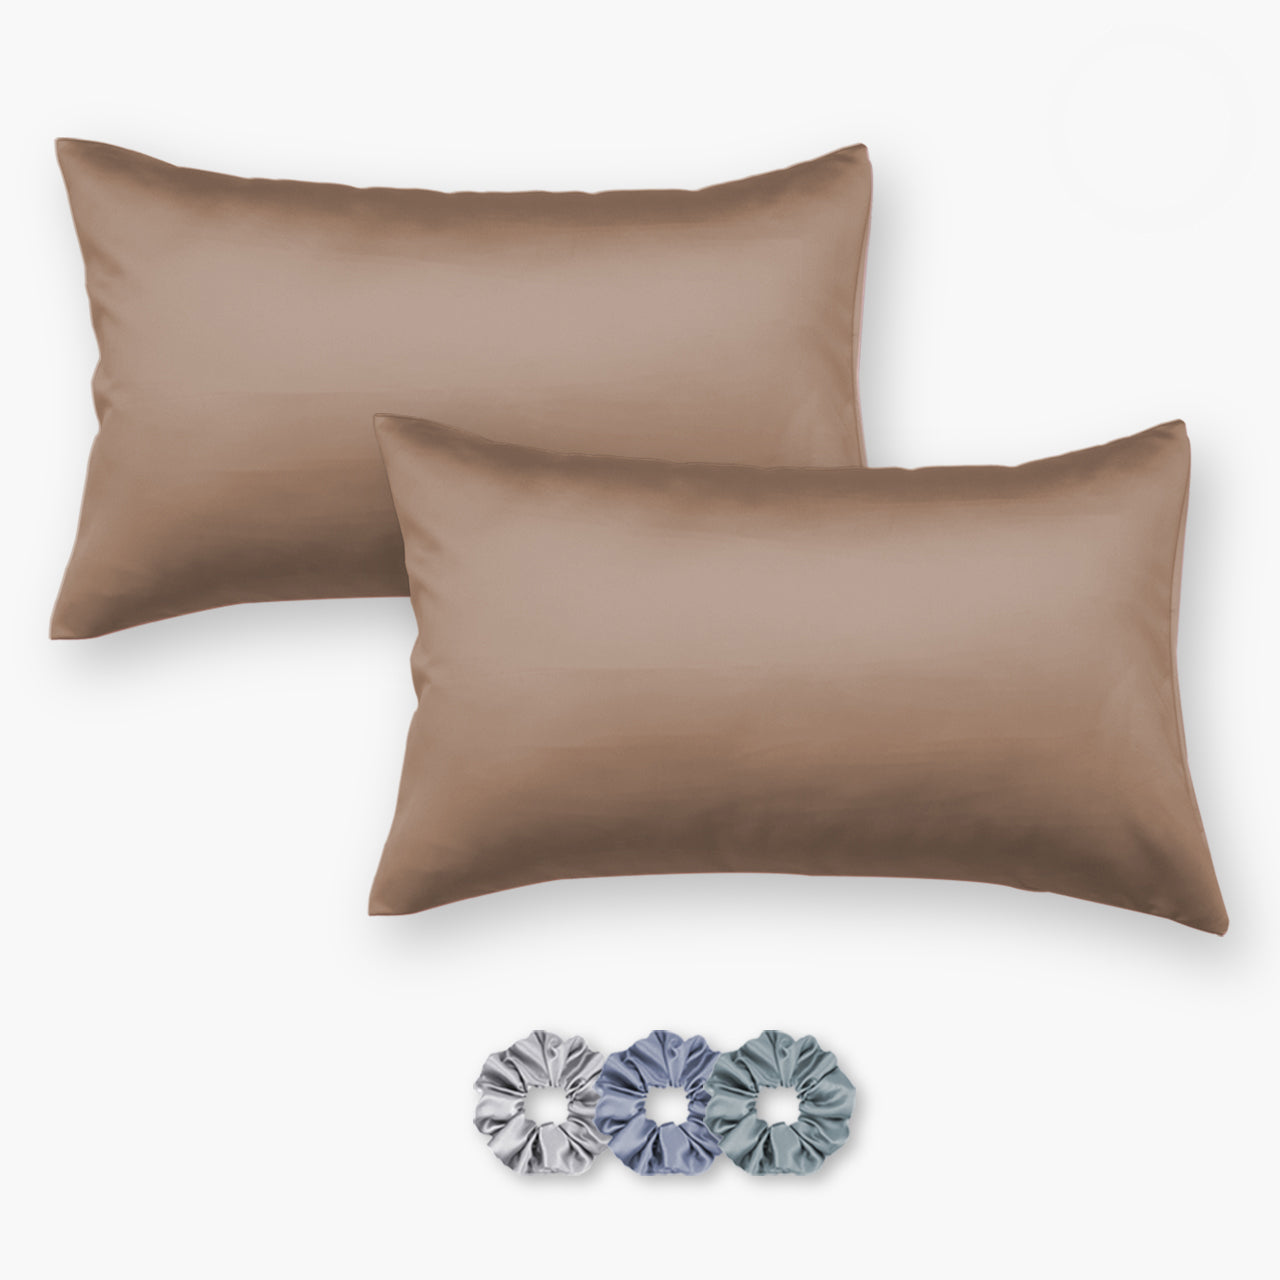 Brown Satin Pillow Covers - Set of 2 (With 3 Free Scrunchies)